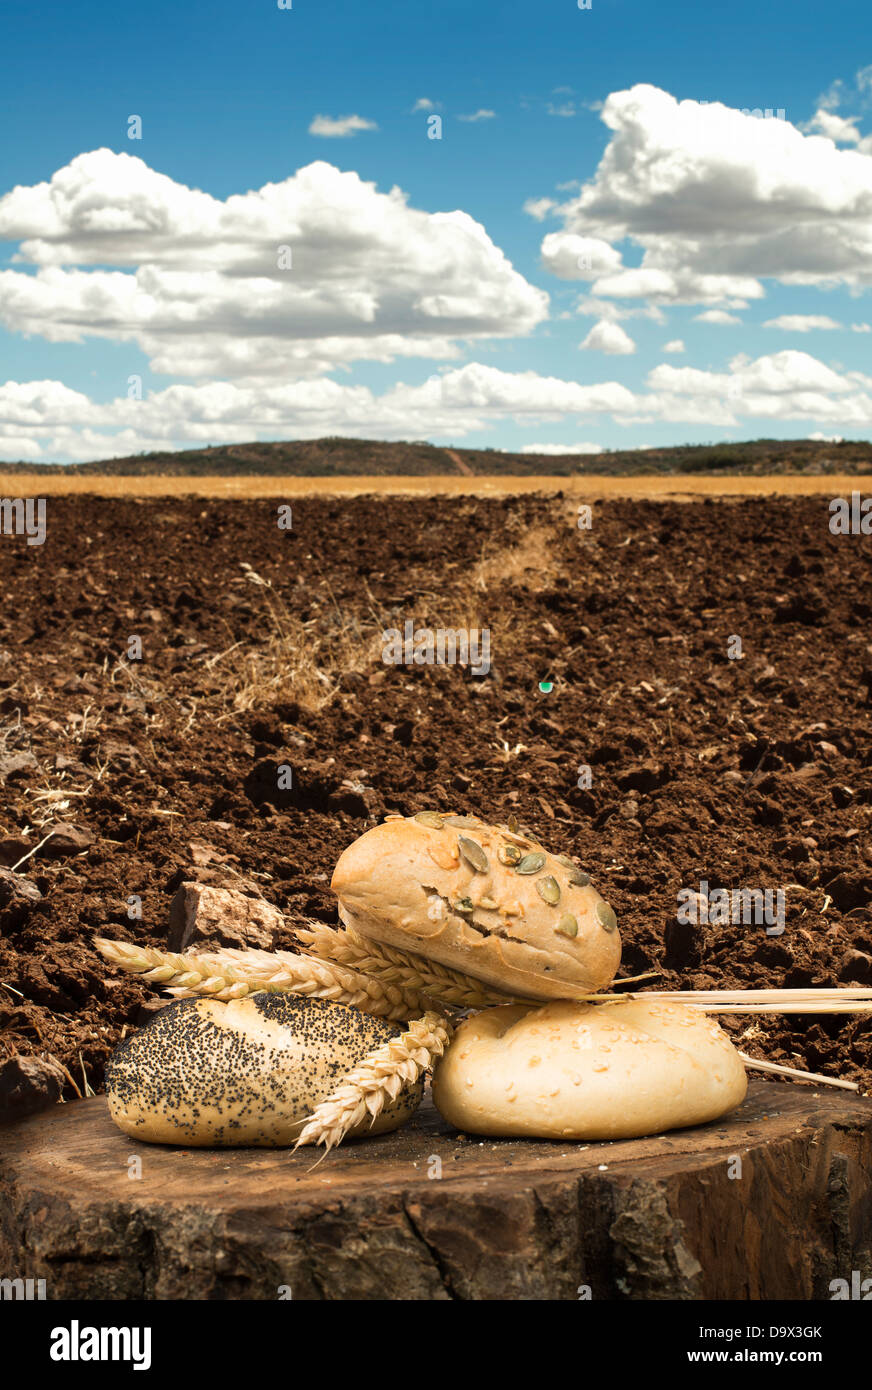 Bread and wheat ears. Plowed land Stock Photo